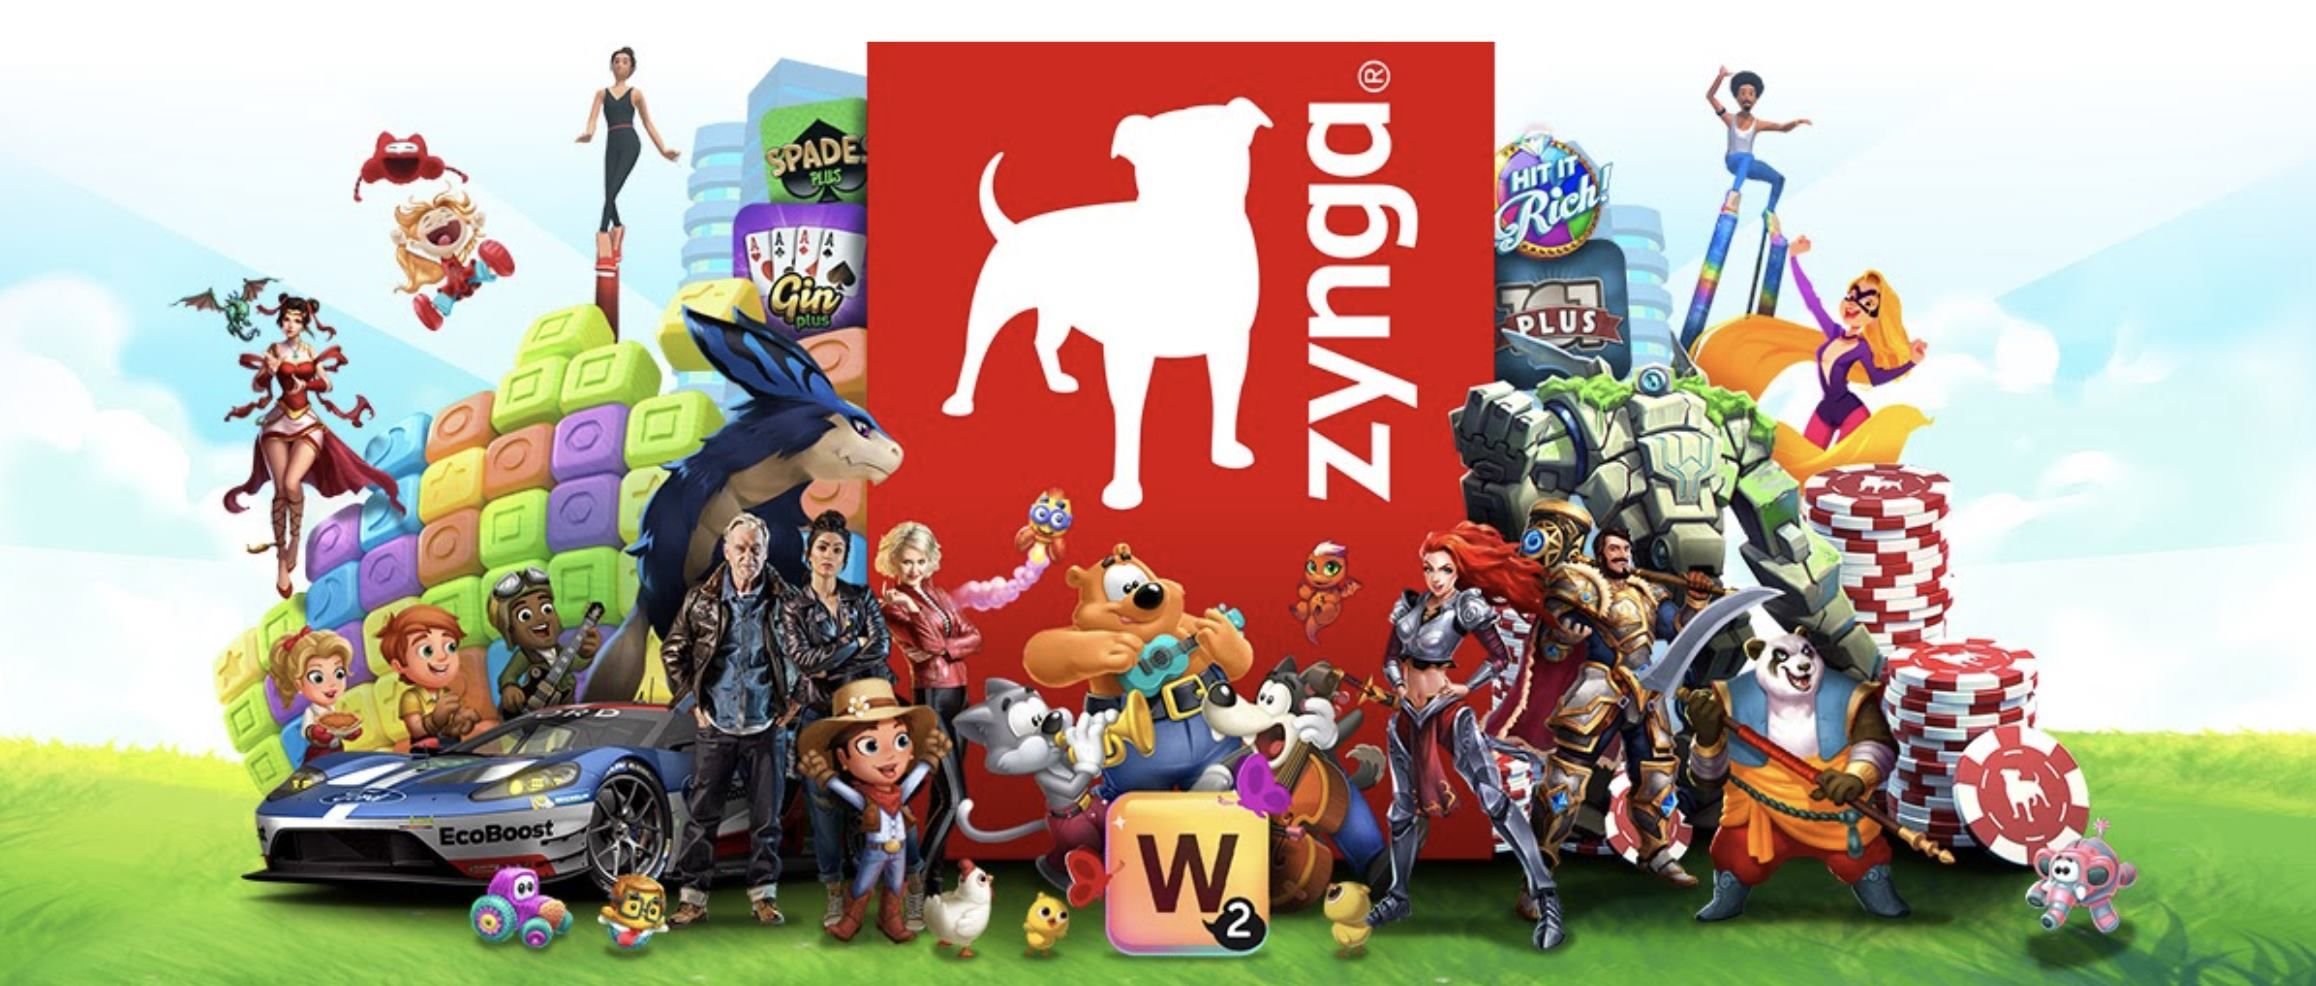 "Giant" Game industry Zynga announces plans to launch the first NFT game this year